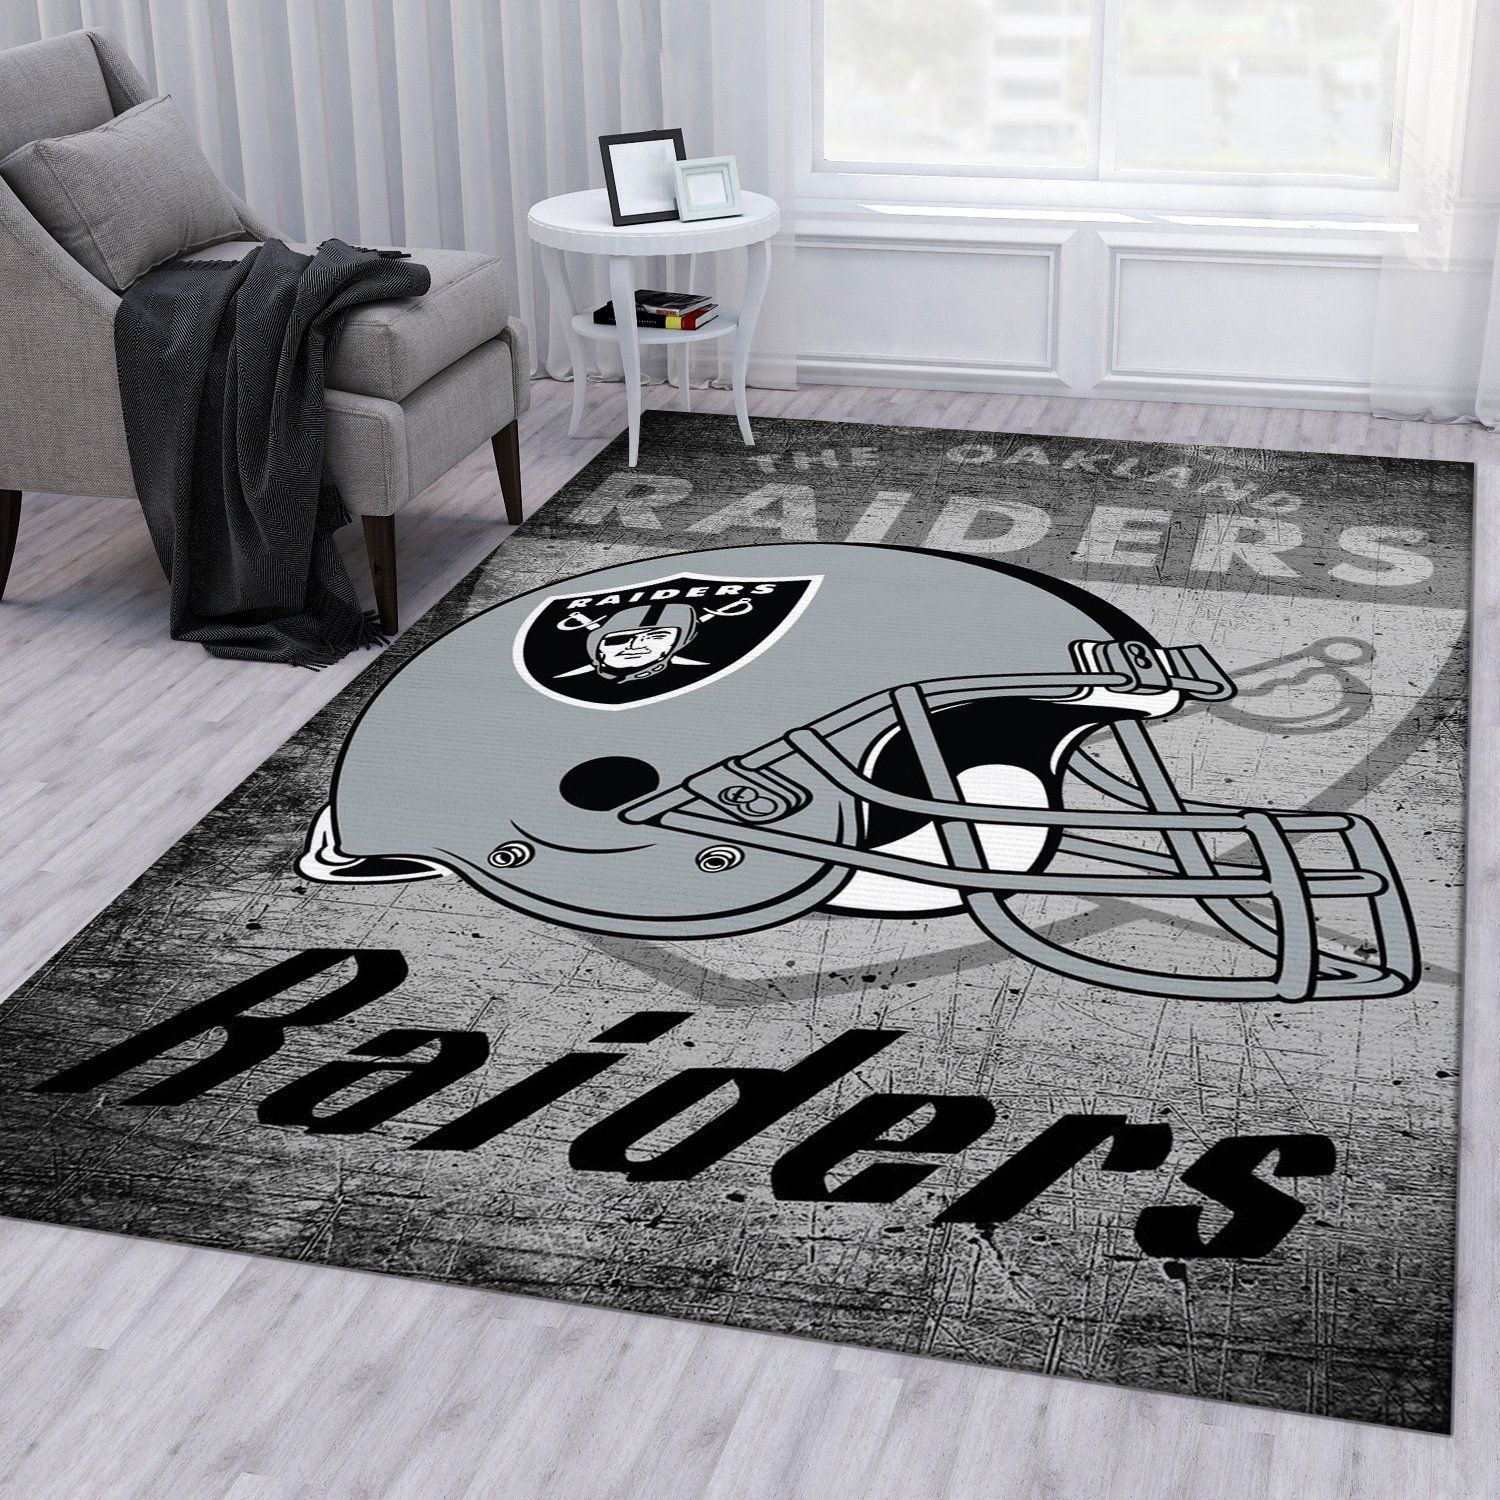 Los Angeles Raiders Retro Nfl Football Team Area Rug For Gift Living Room Rug US Gift Decor - Indoor Outdoor Rugs